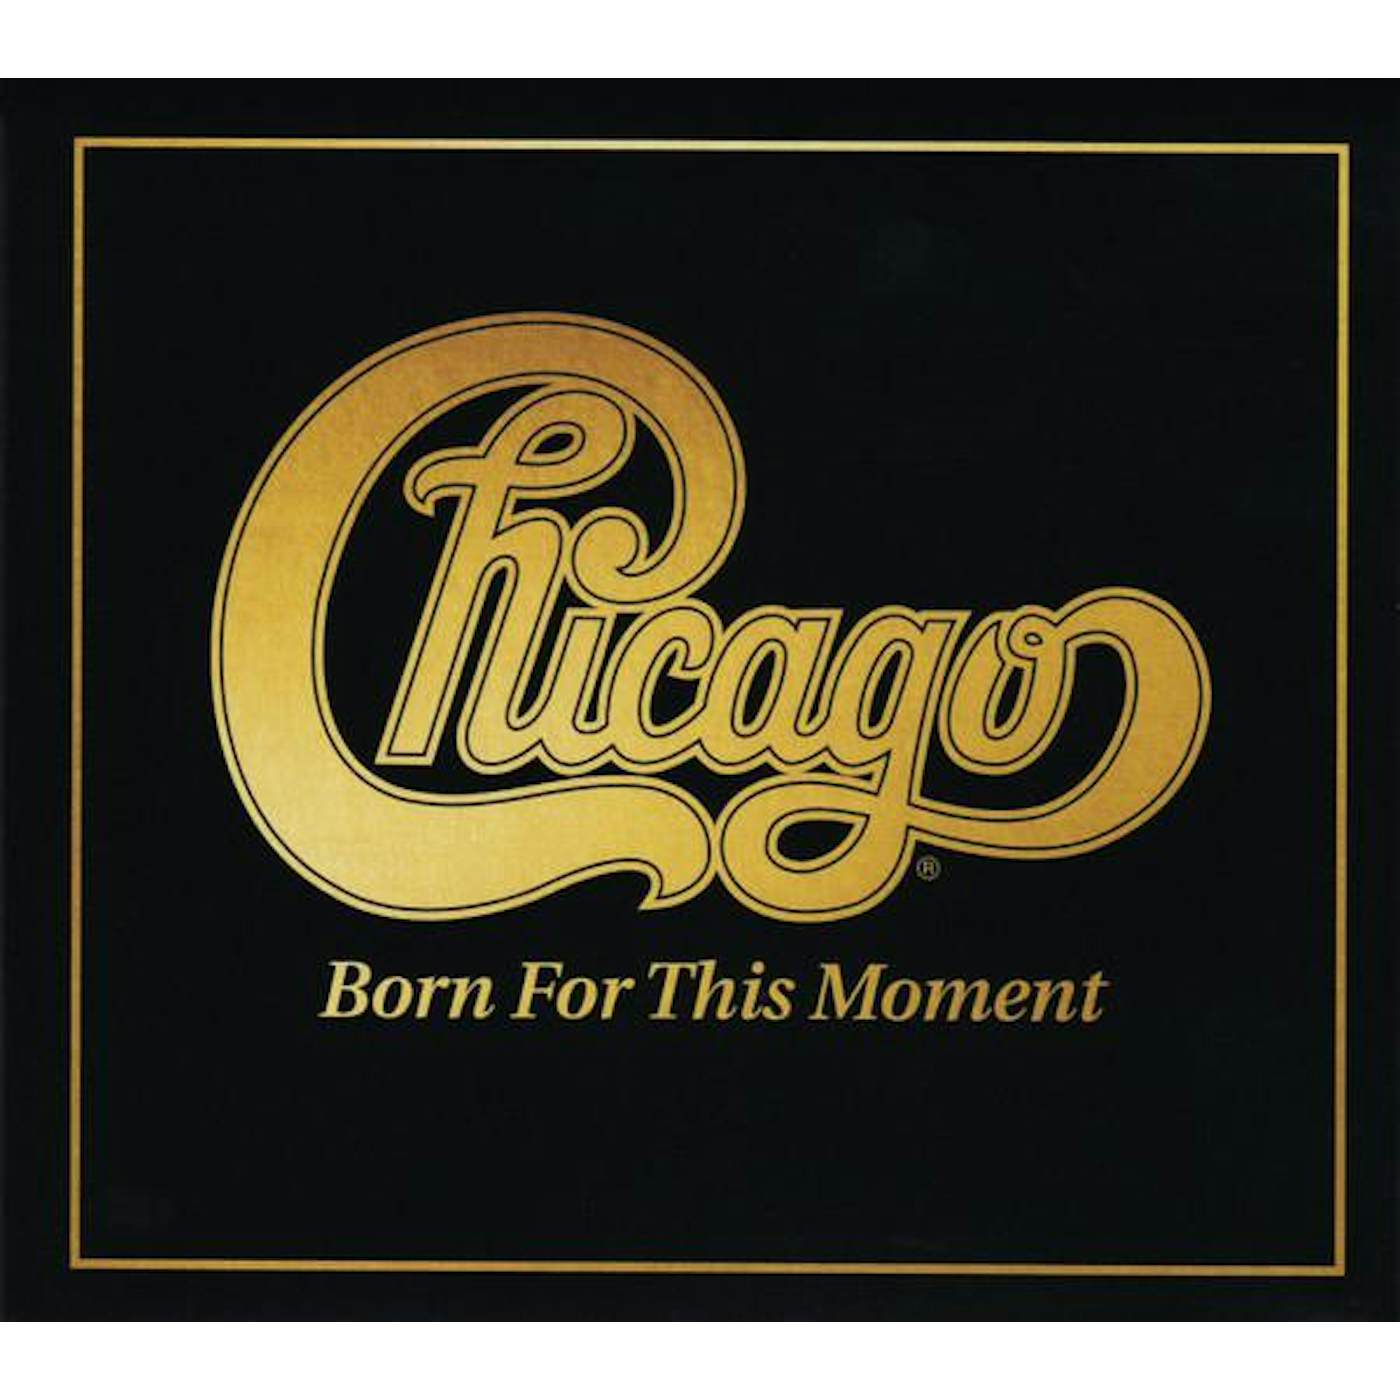 Chicago Born For This Moment CD